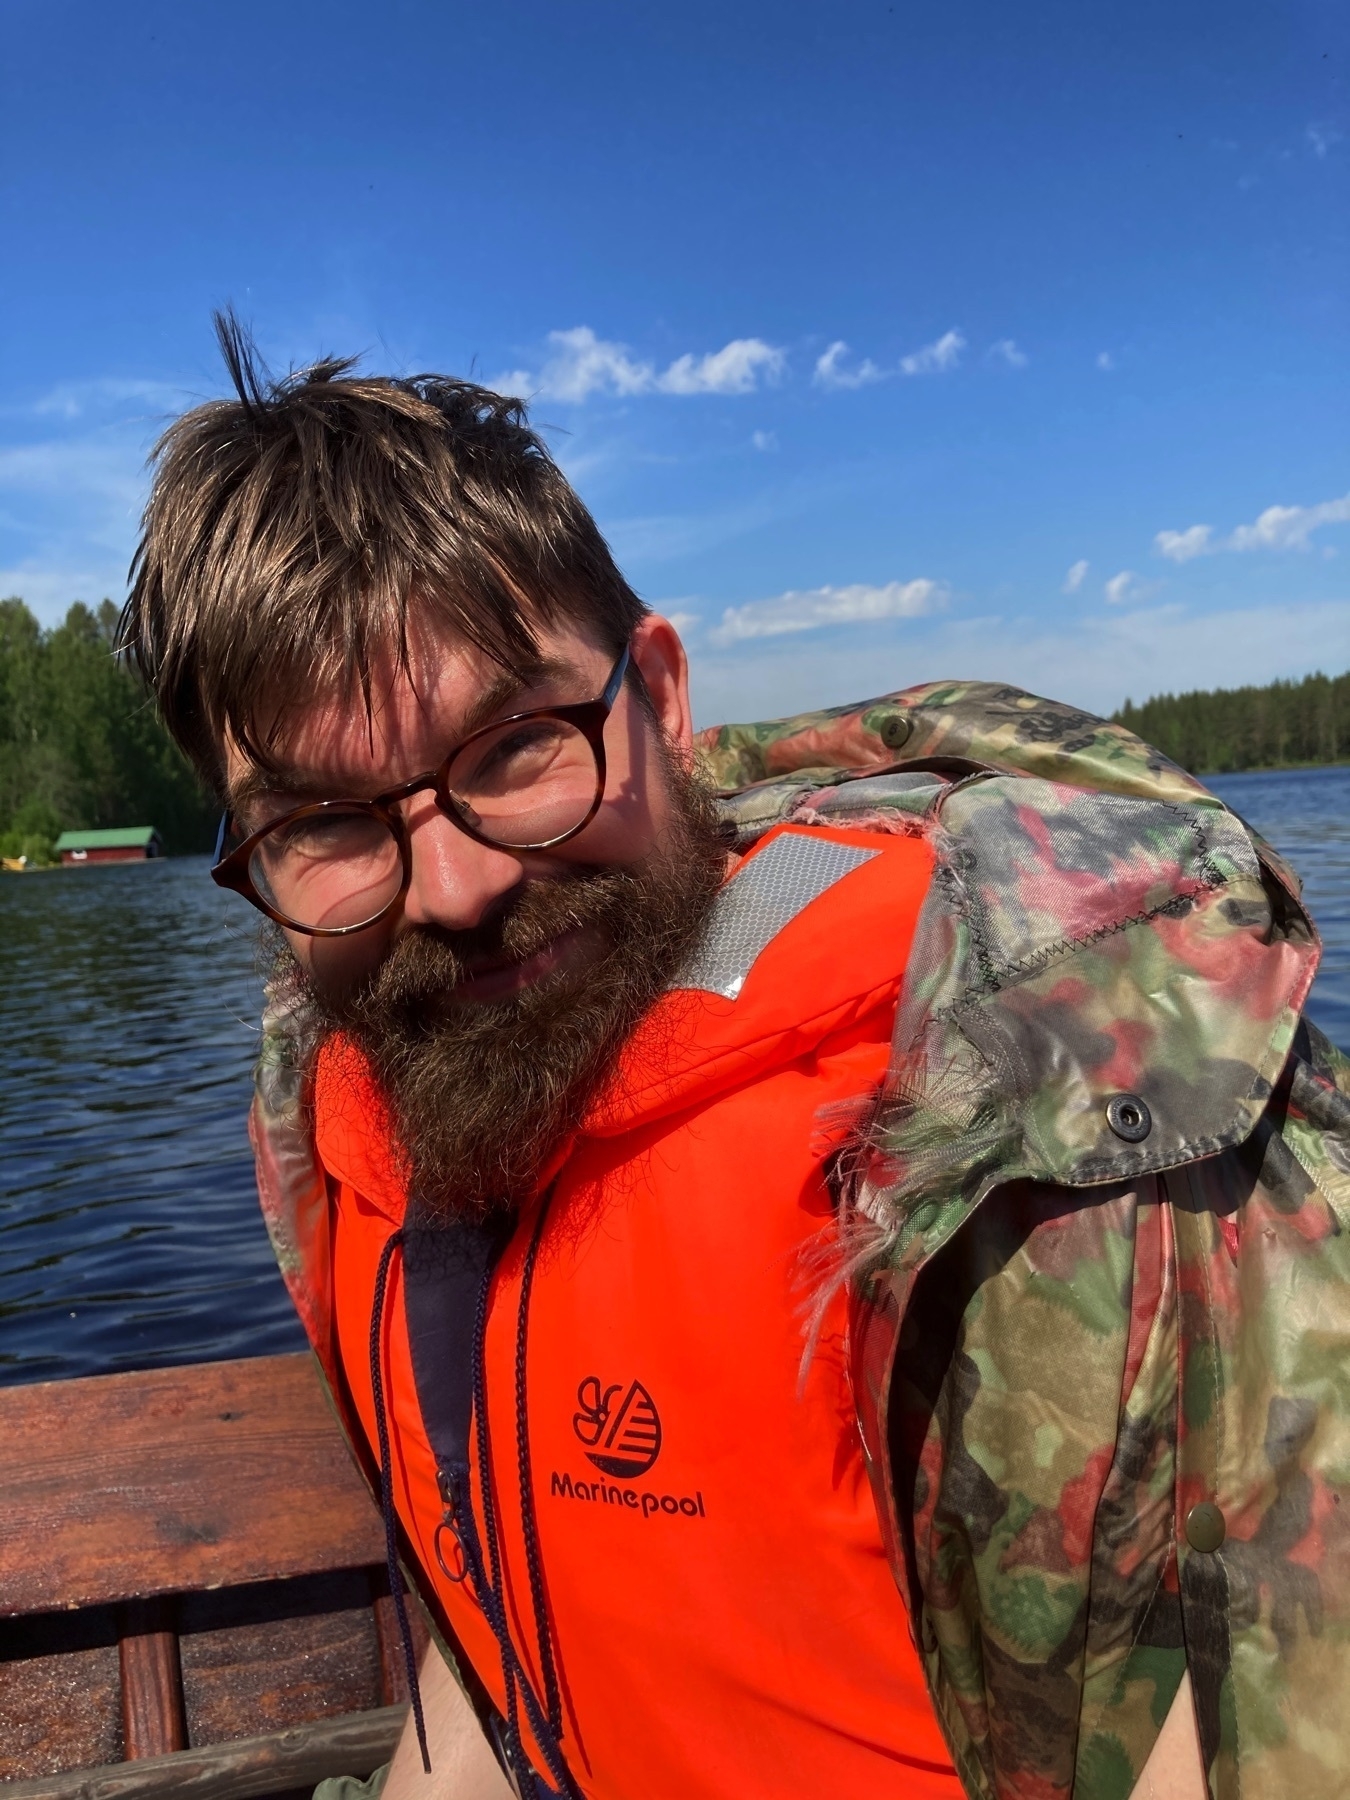 Just a slightly goofy picture of me sitting in a wooden boat, from a recent trip down the rapids around Ruuna in Eastern Finland.